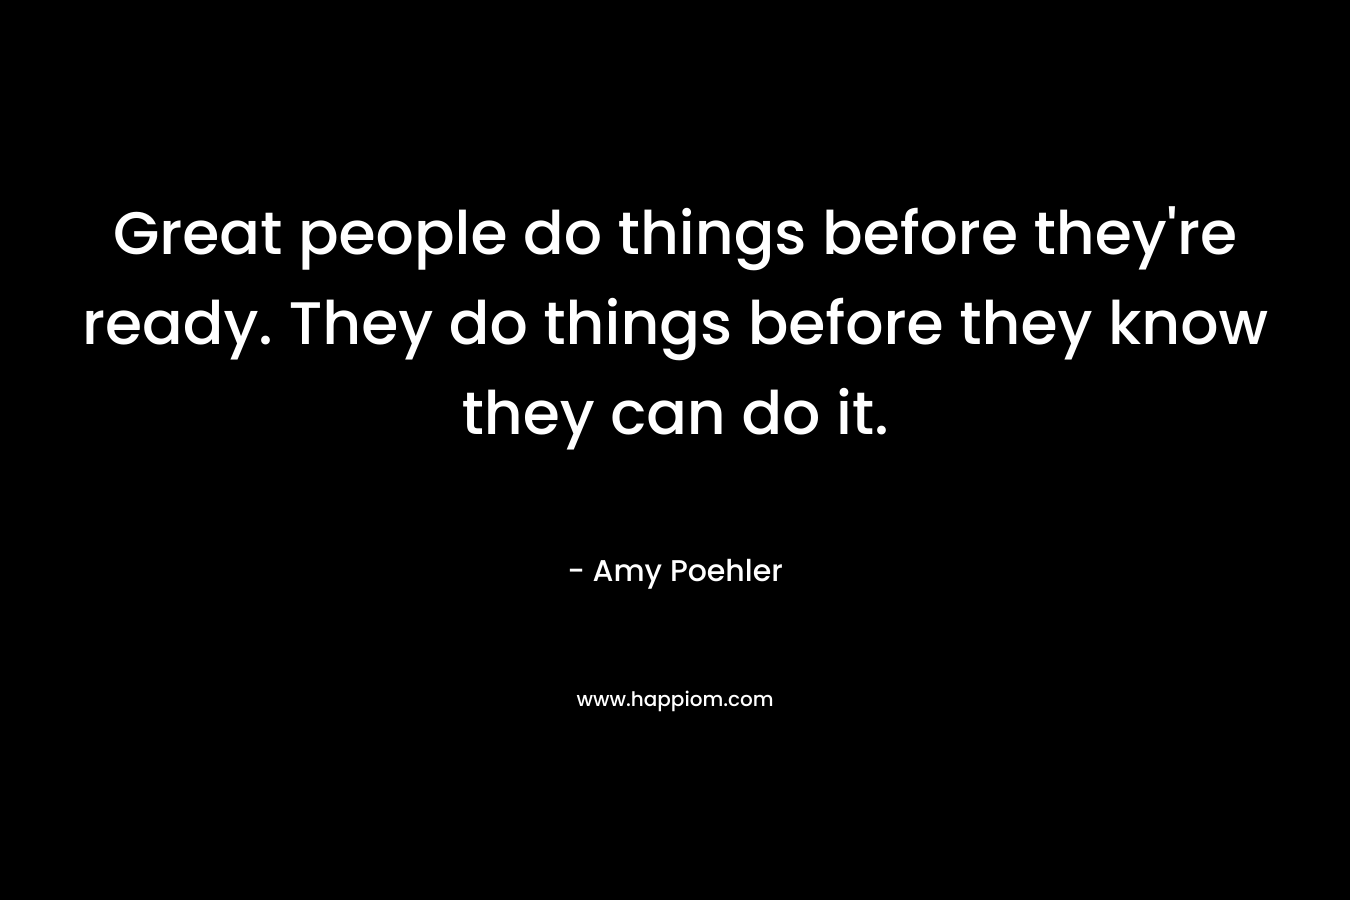 Great people do things before they’re ready. They do things before they know they can do it. – Amy Poehler